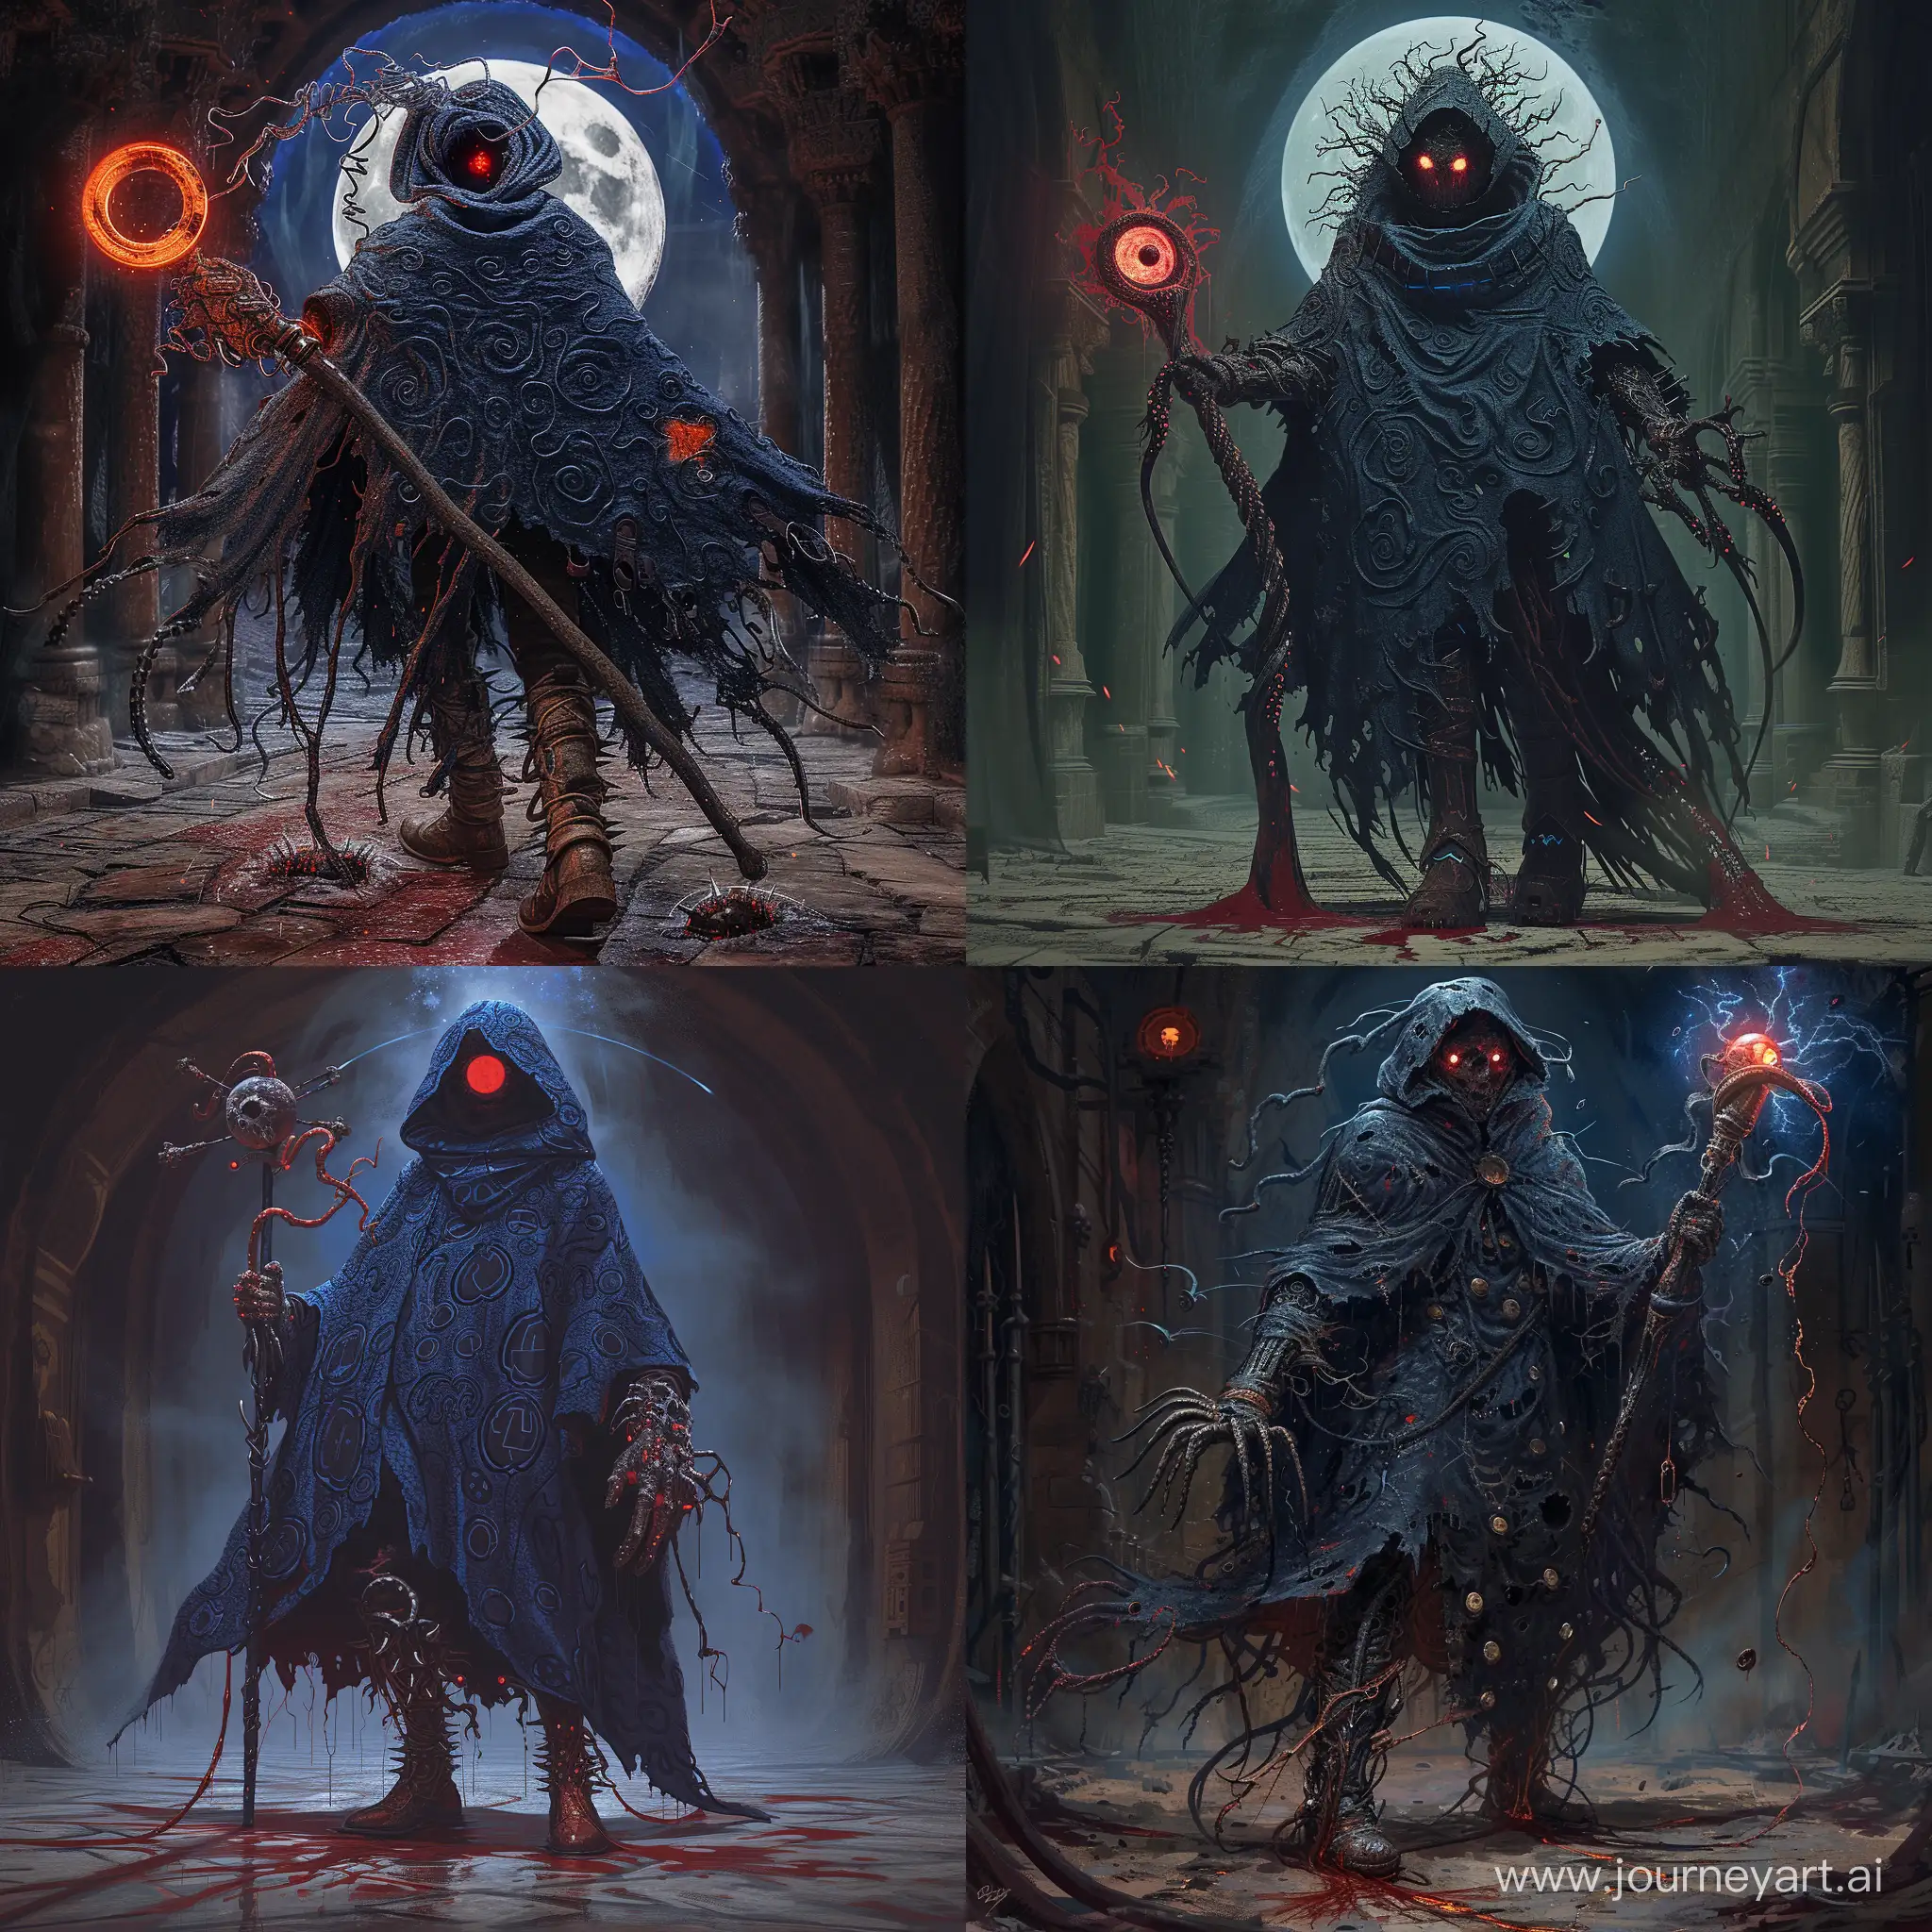 a man wearing, Deep abyss-blue cloak with chaotic, swirling patterns, Gauntlets with tentacle-like appendages, Boots with spiked soles leaving ominous footprints, plague doctor mask with glowing red eyes, wielding a staff channeling eldritch powers, standing in a cult like place, blood moon,  bloodborne aesthetic, 1970's dark fantasy, detailed, cosmic horror, gritty, dark lighting, edgy, blood on weapon, 64 bit